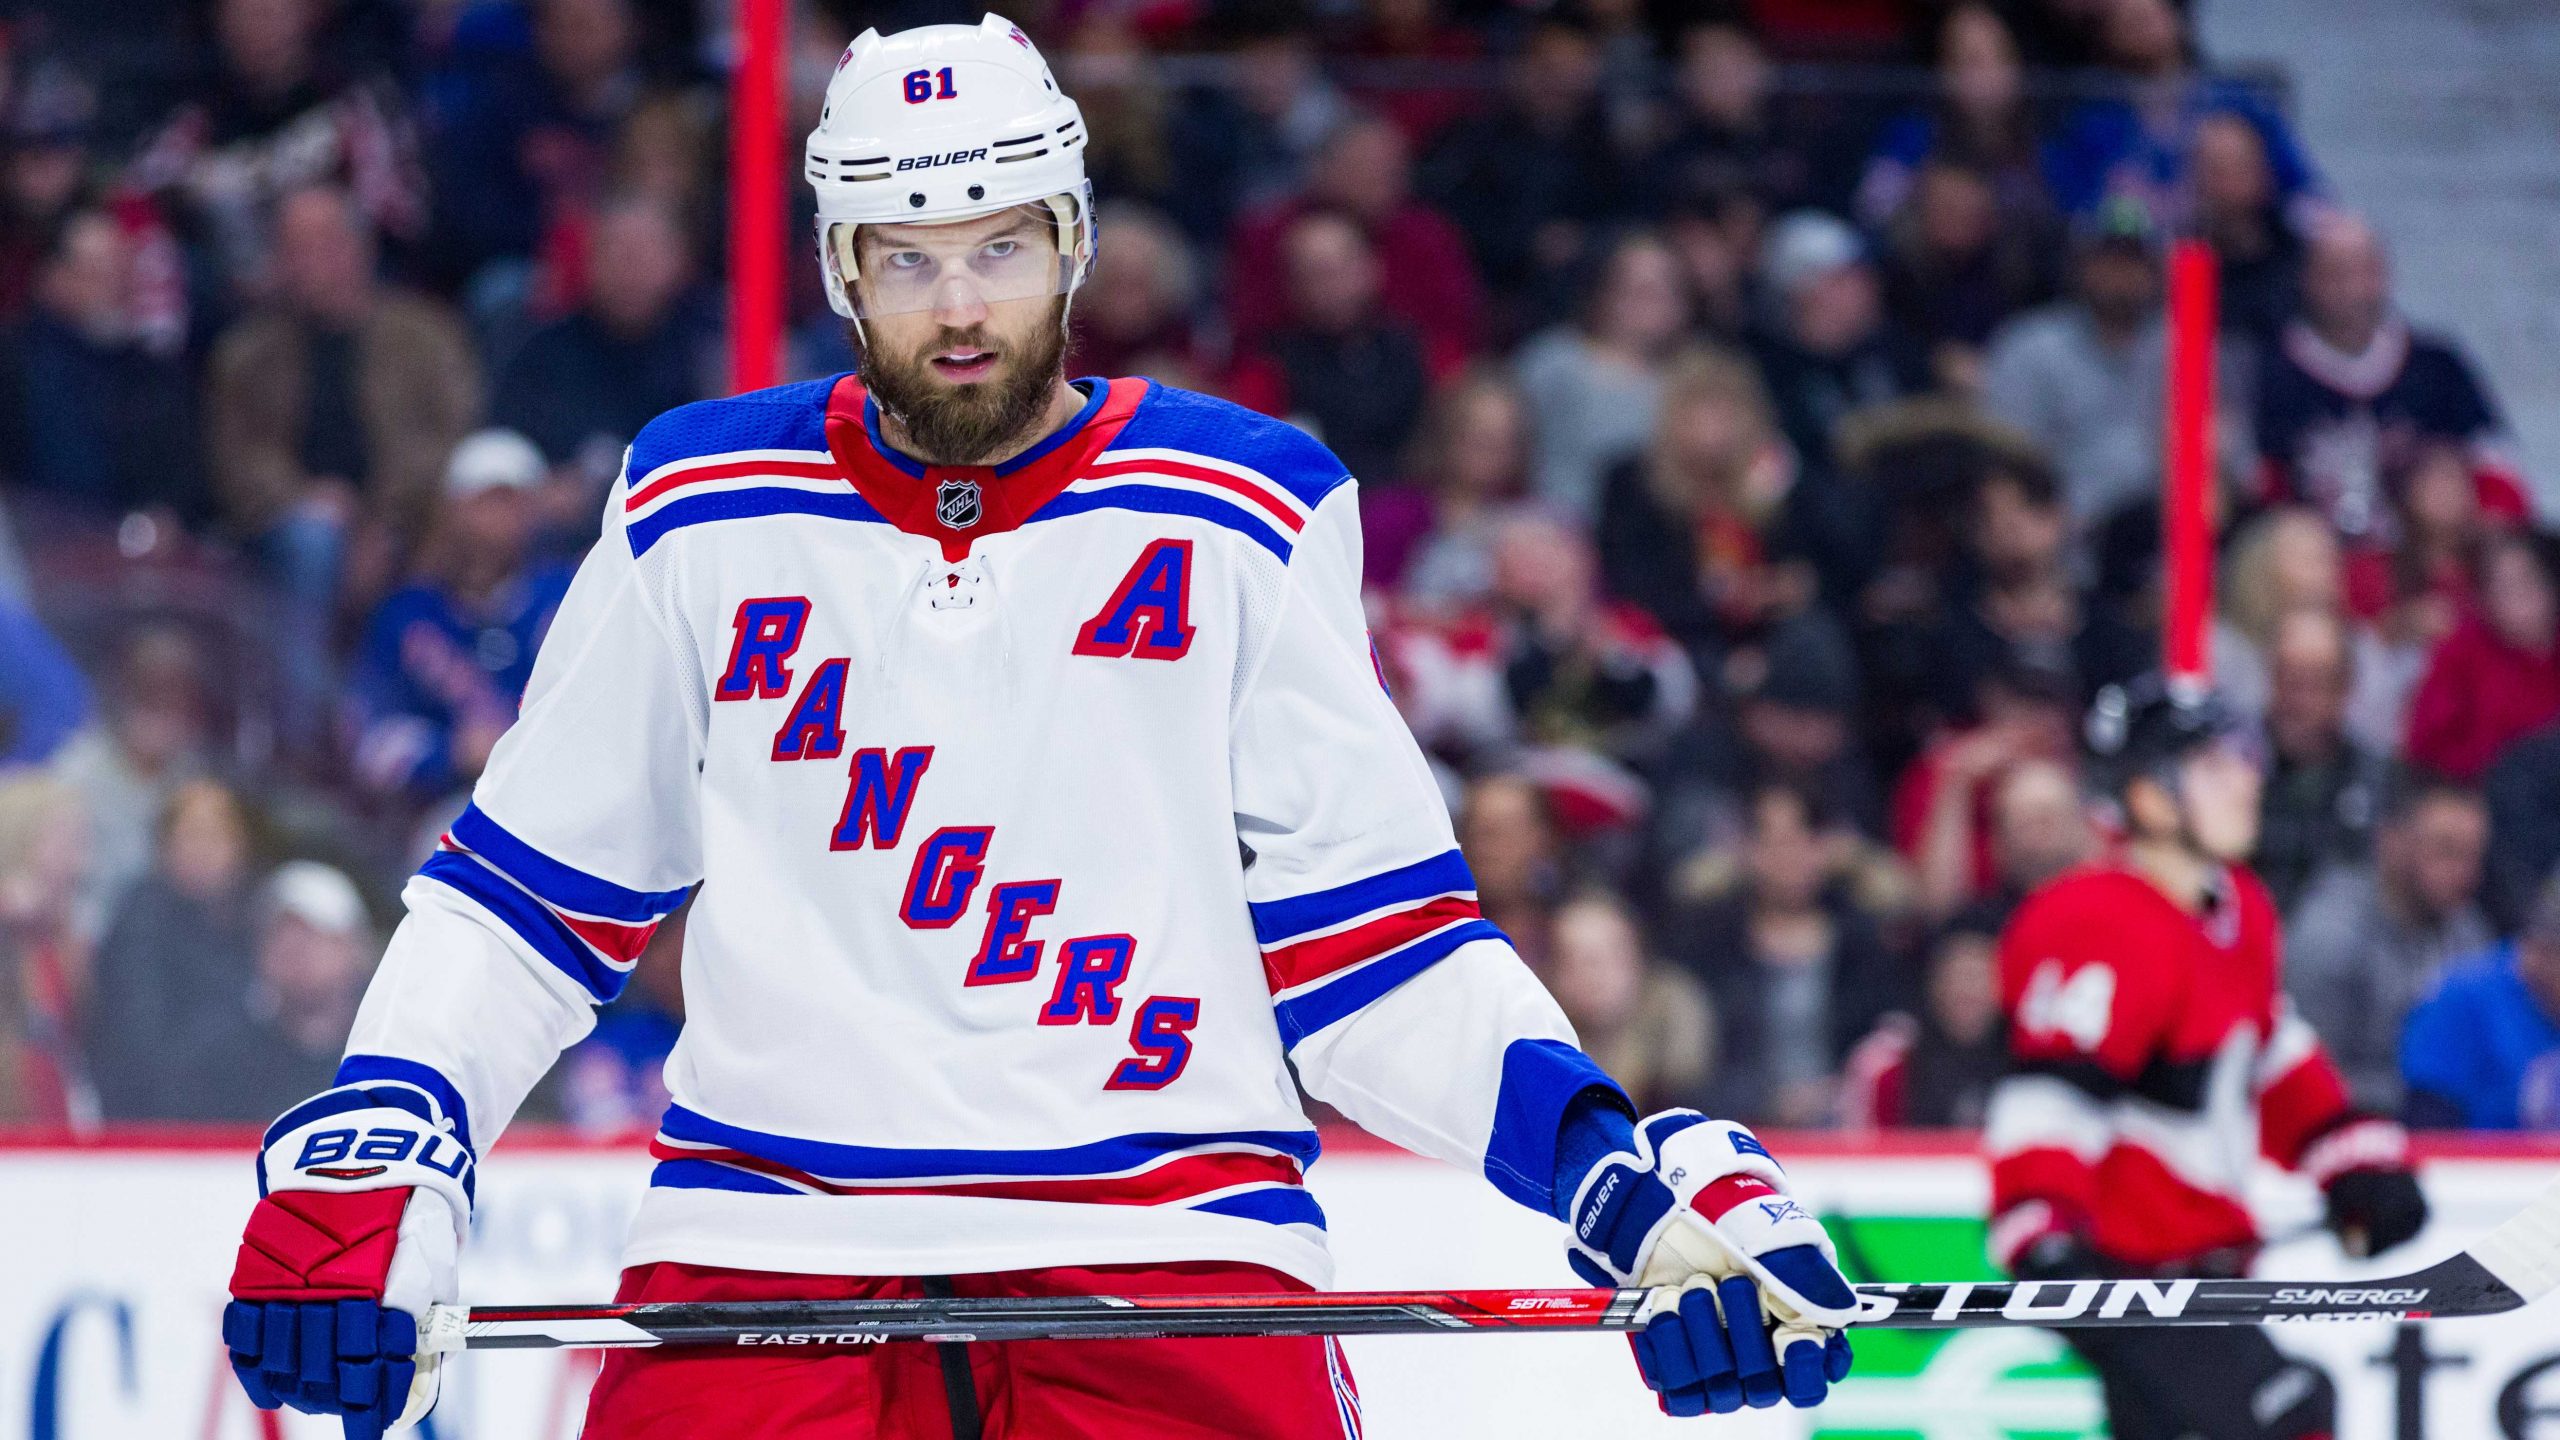 NHL trade deadline: Rick Nash much sought after, but difficult to land